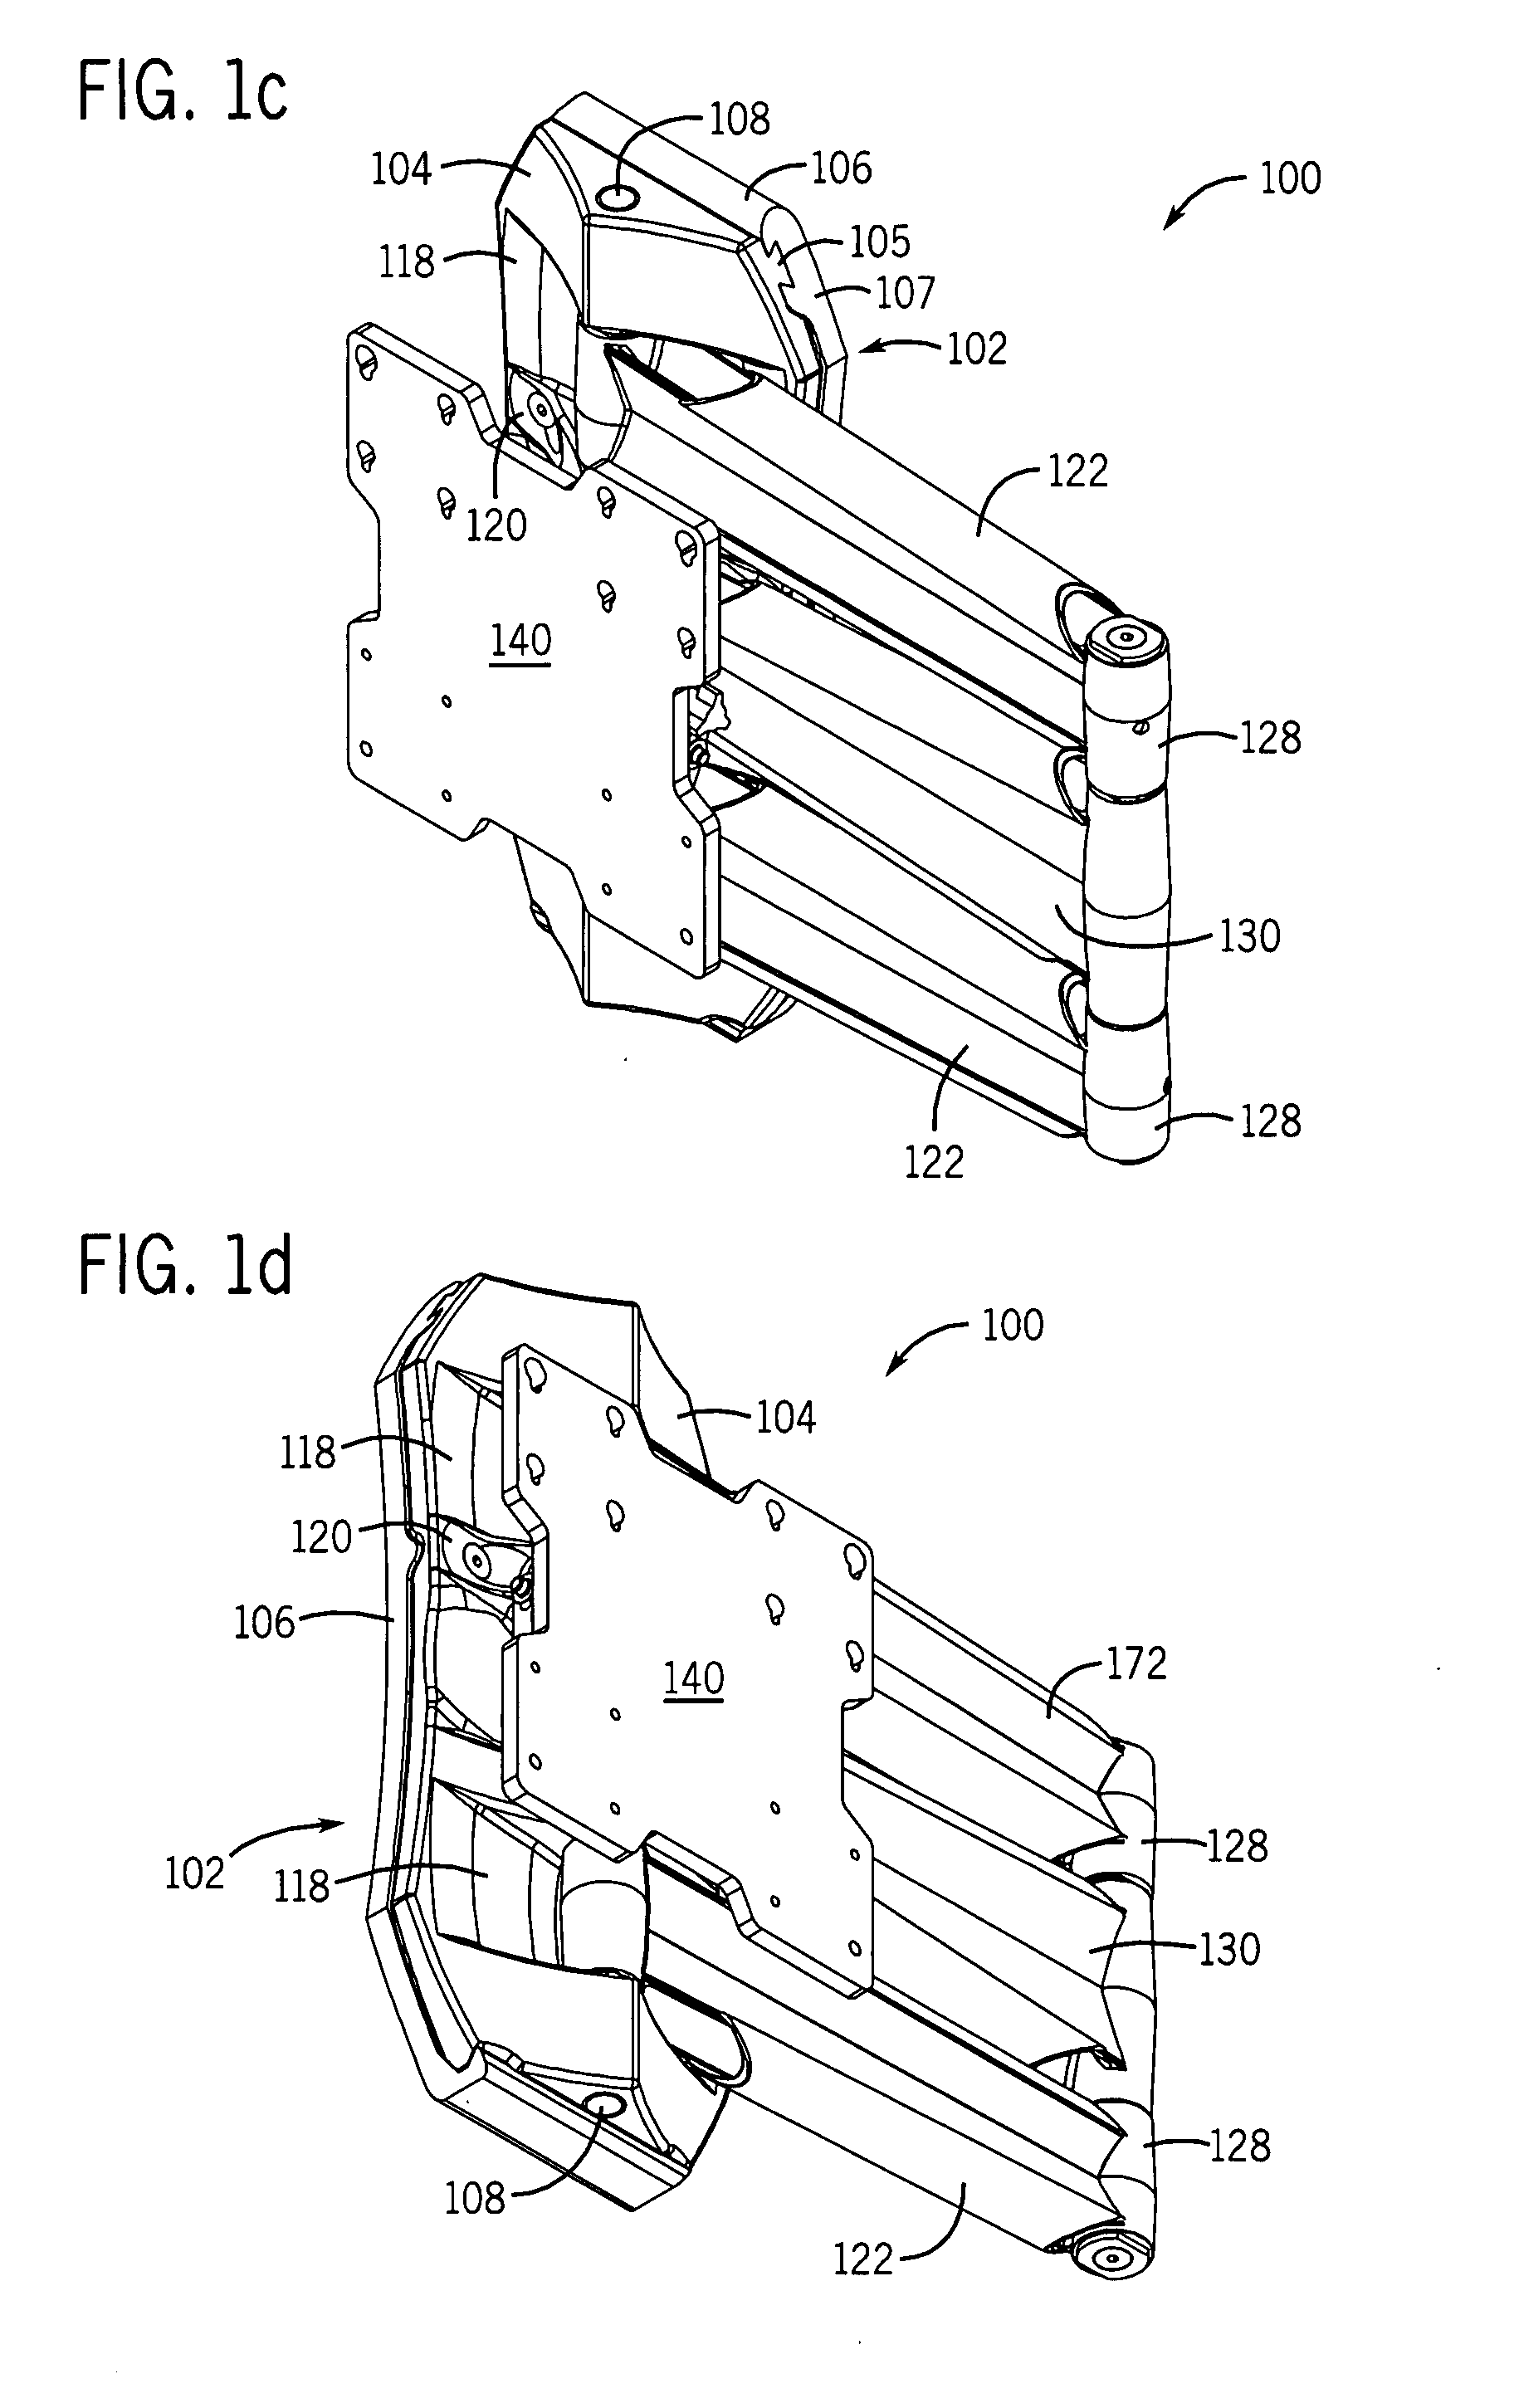 Mounting system with adjustable moving capabilities